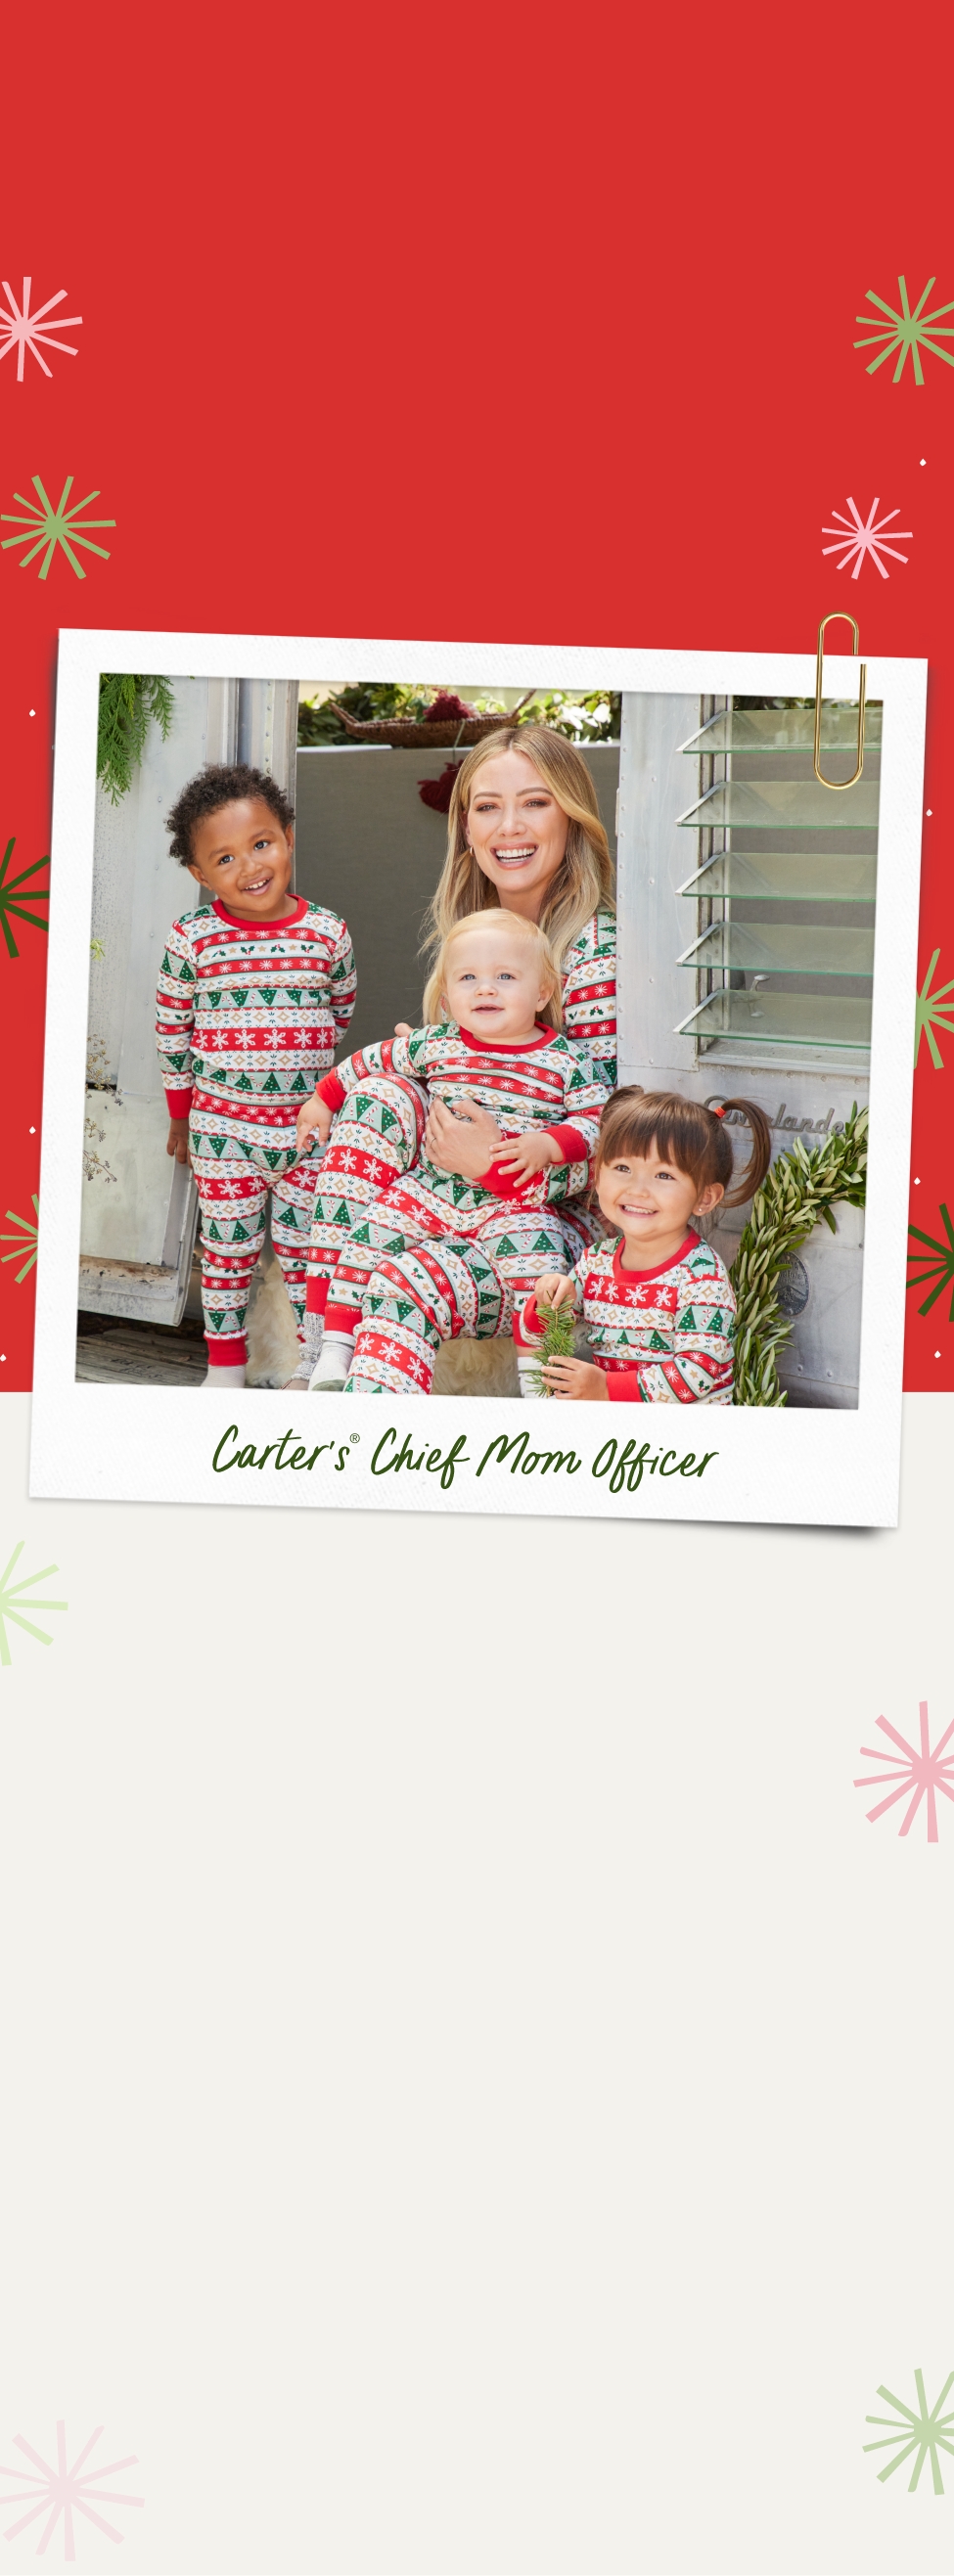 Hilary duff carter's dream holiday giveaway